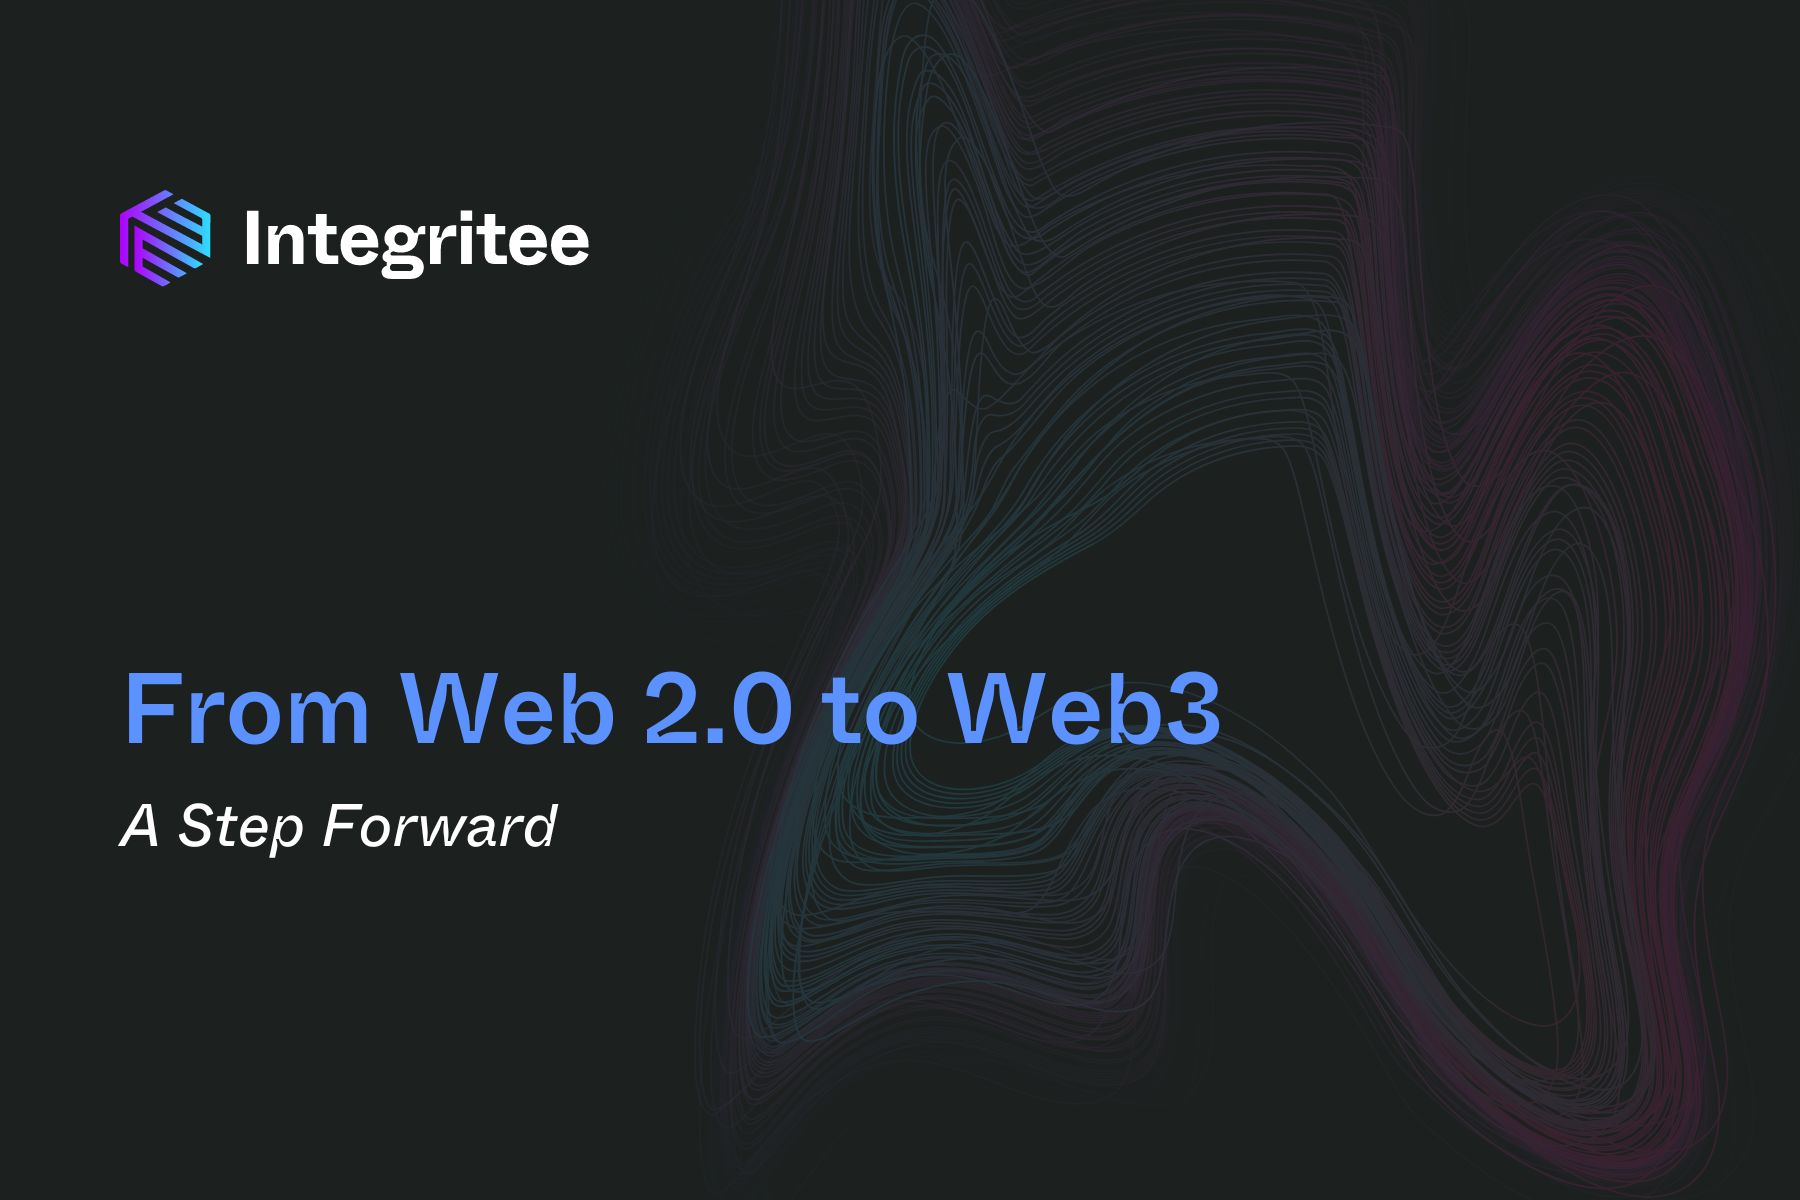 From Web 2.0 to Web3: A Step Forward